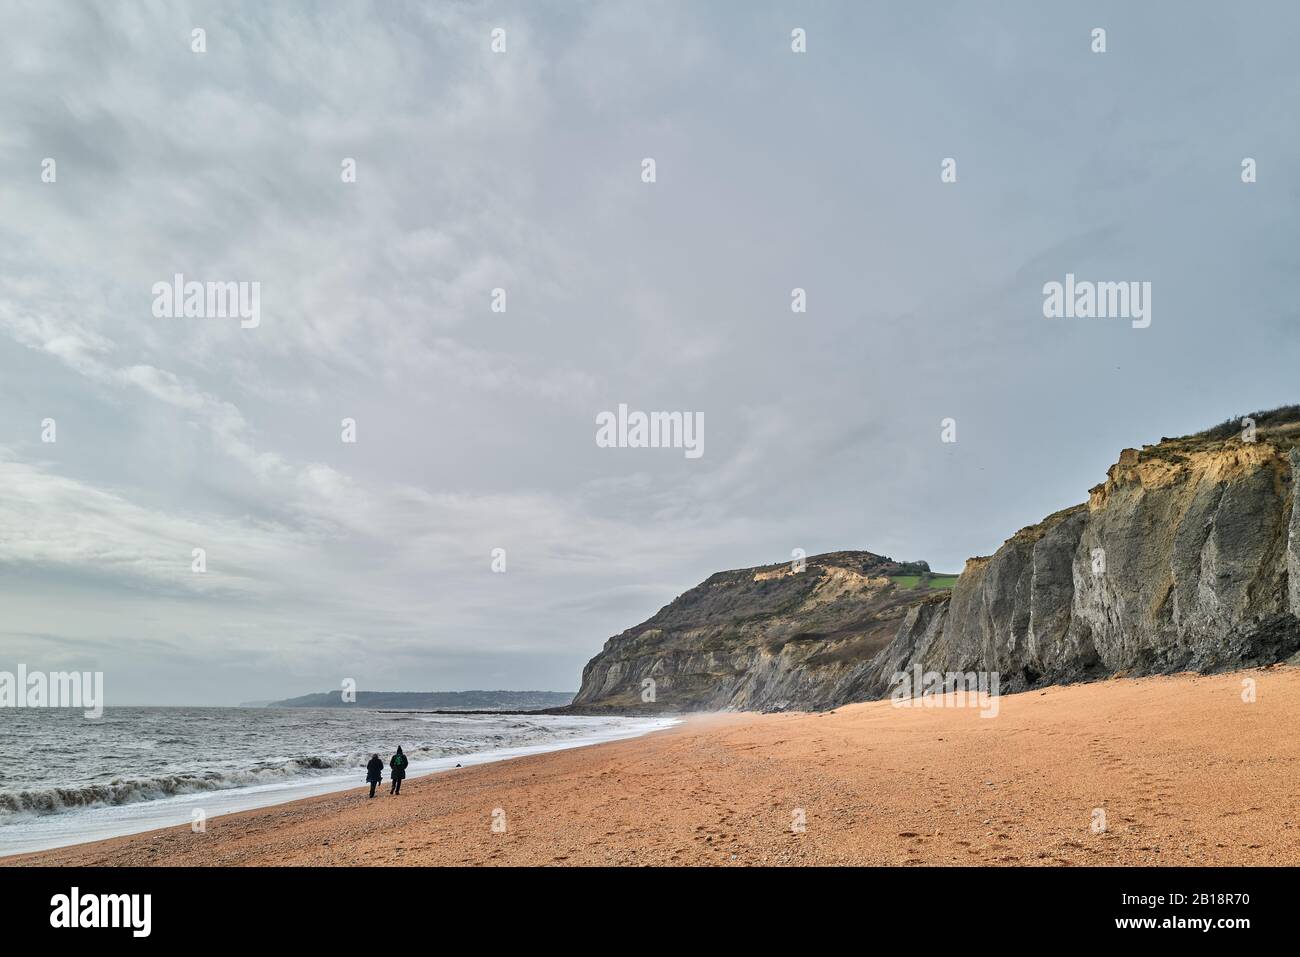 The shingle beach at Seatown, Dorset, by the English Channel with the cliffs of the Jurassic heritage coastline of England, on a sunny winter day. Stock Photo